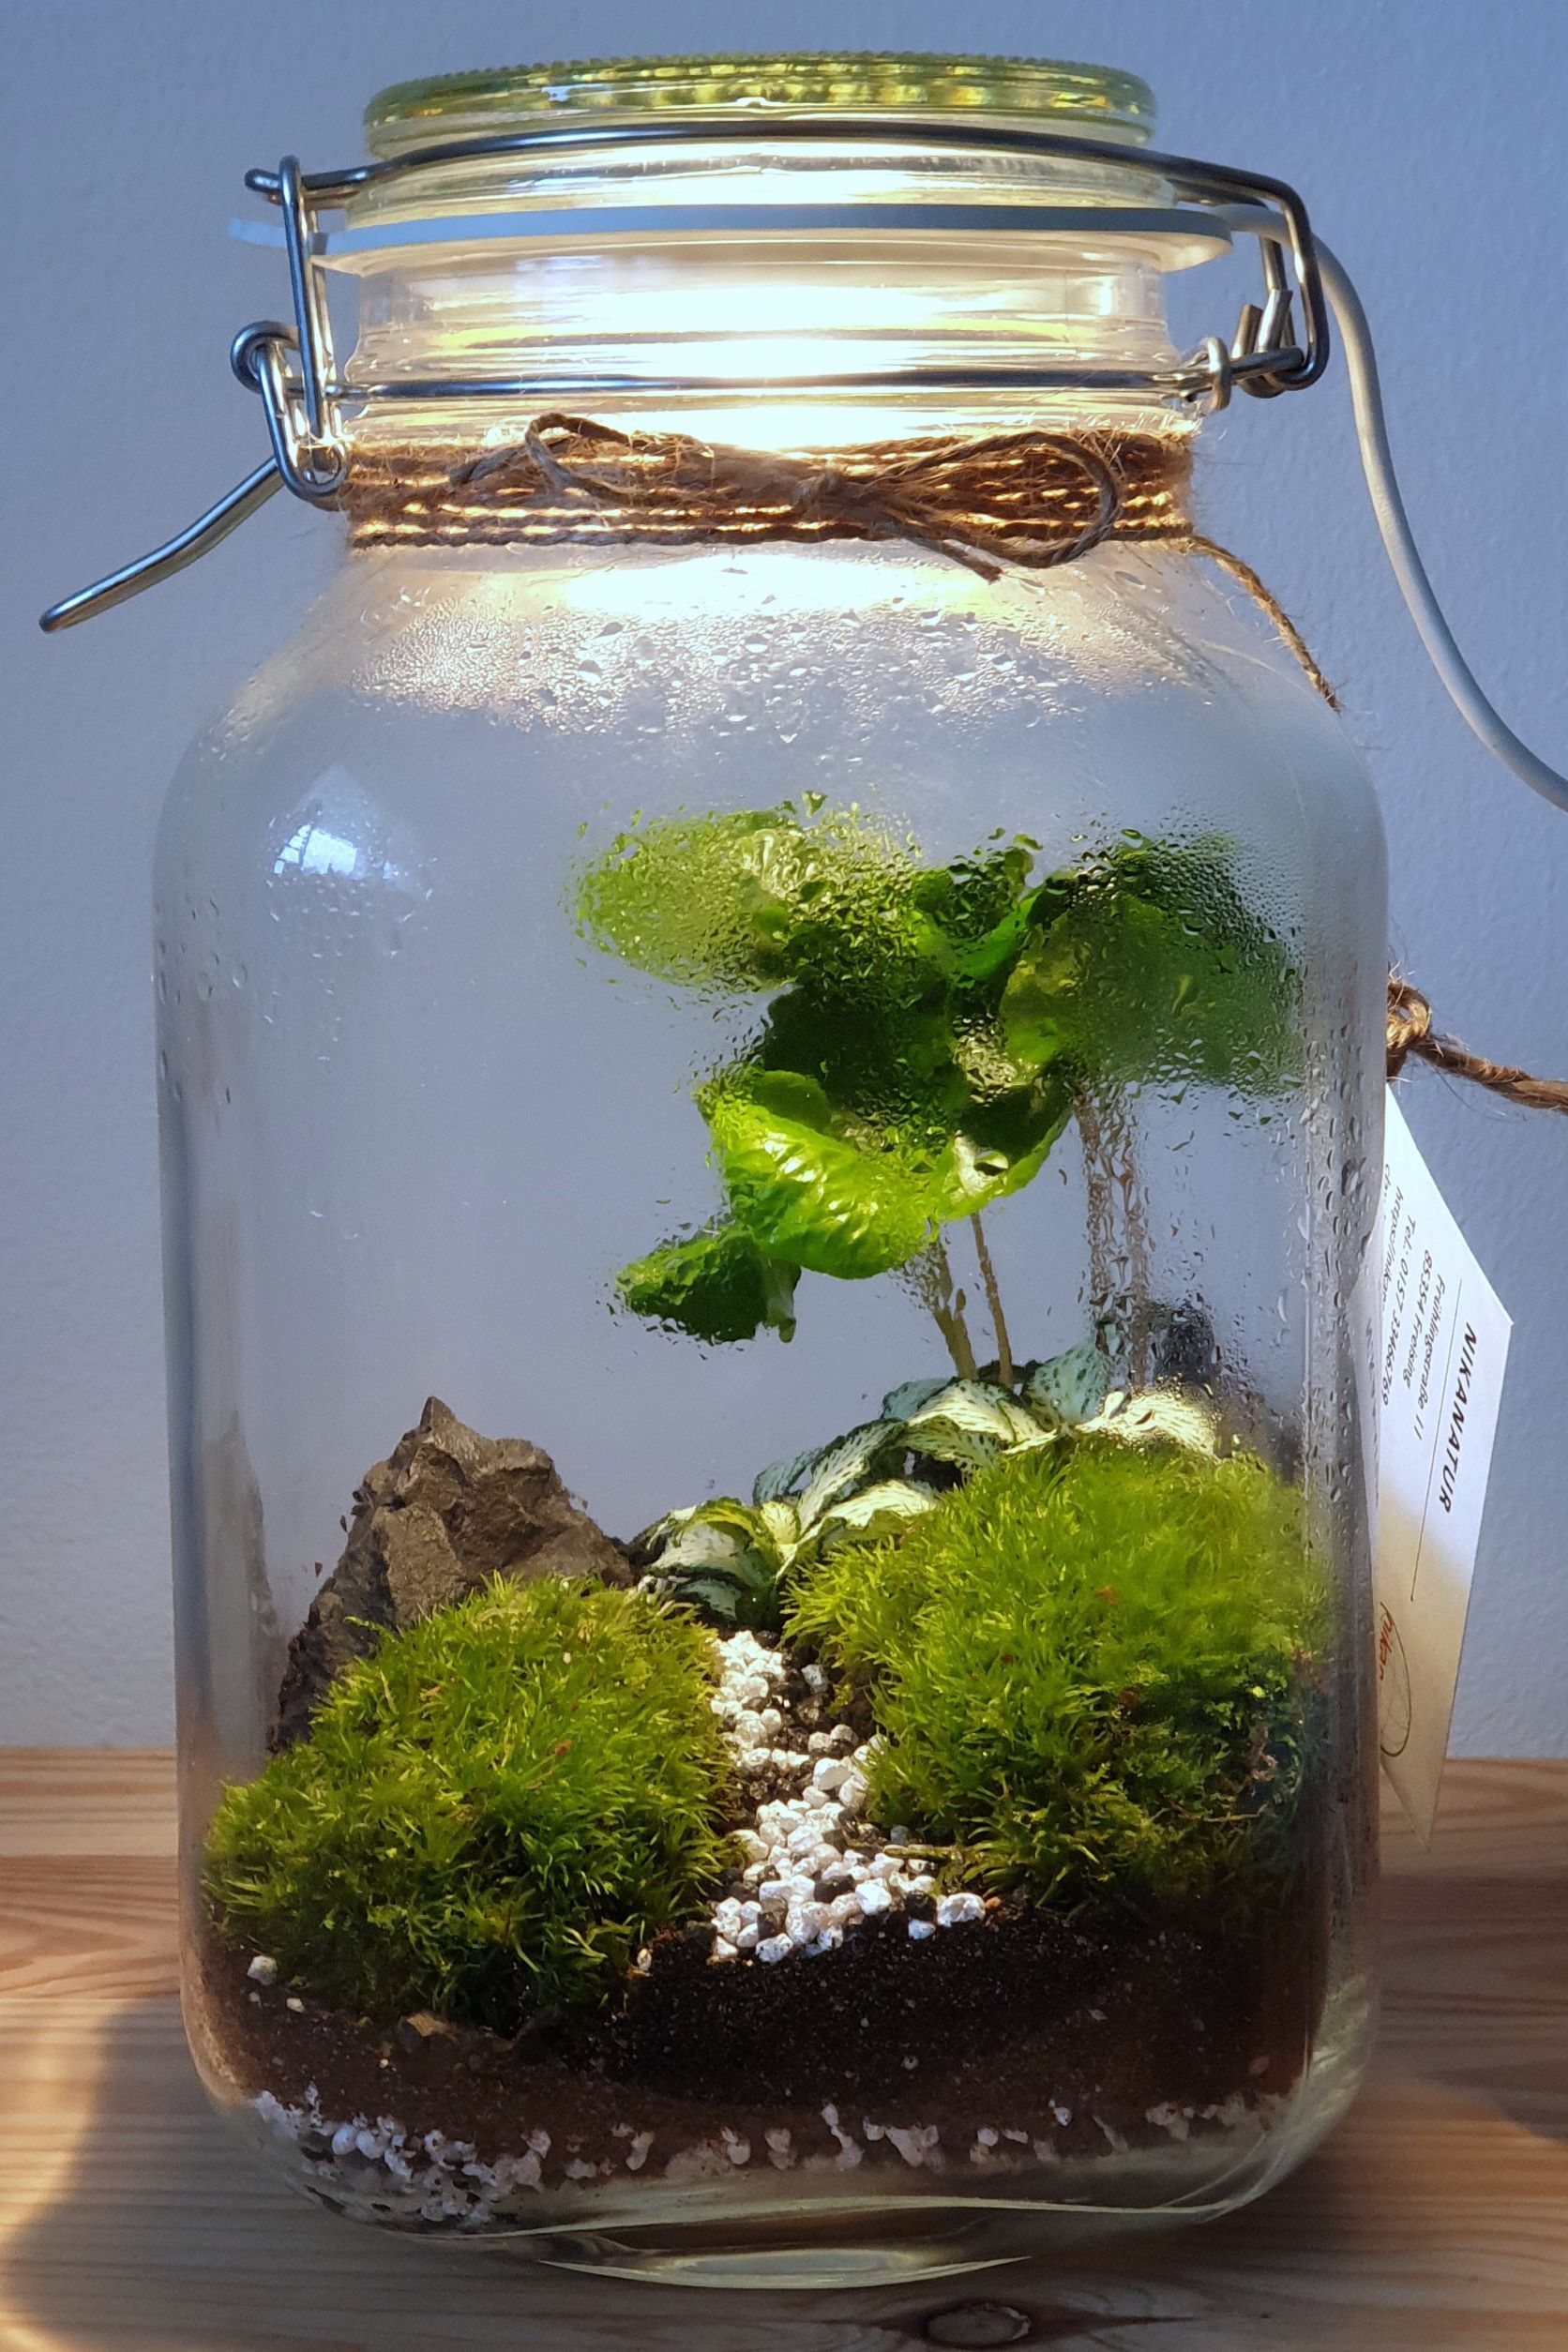 Terrarium containing coffee plants, moss and nerve plants (Fittonia)